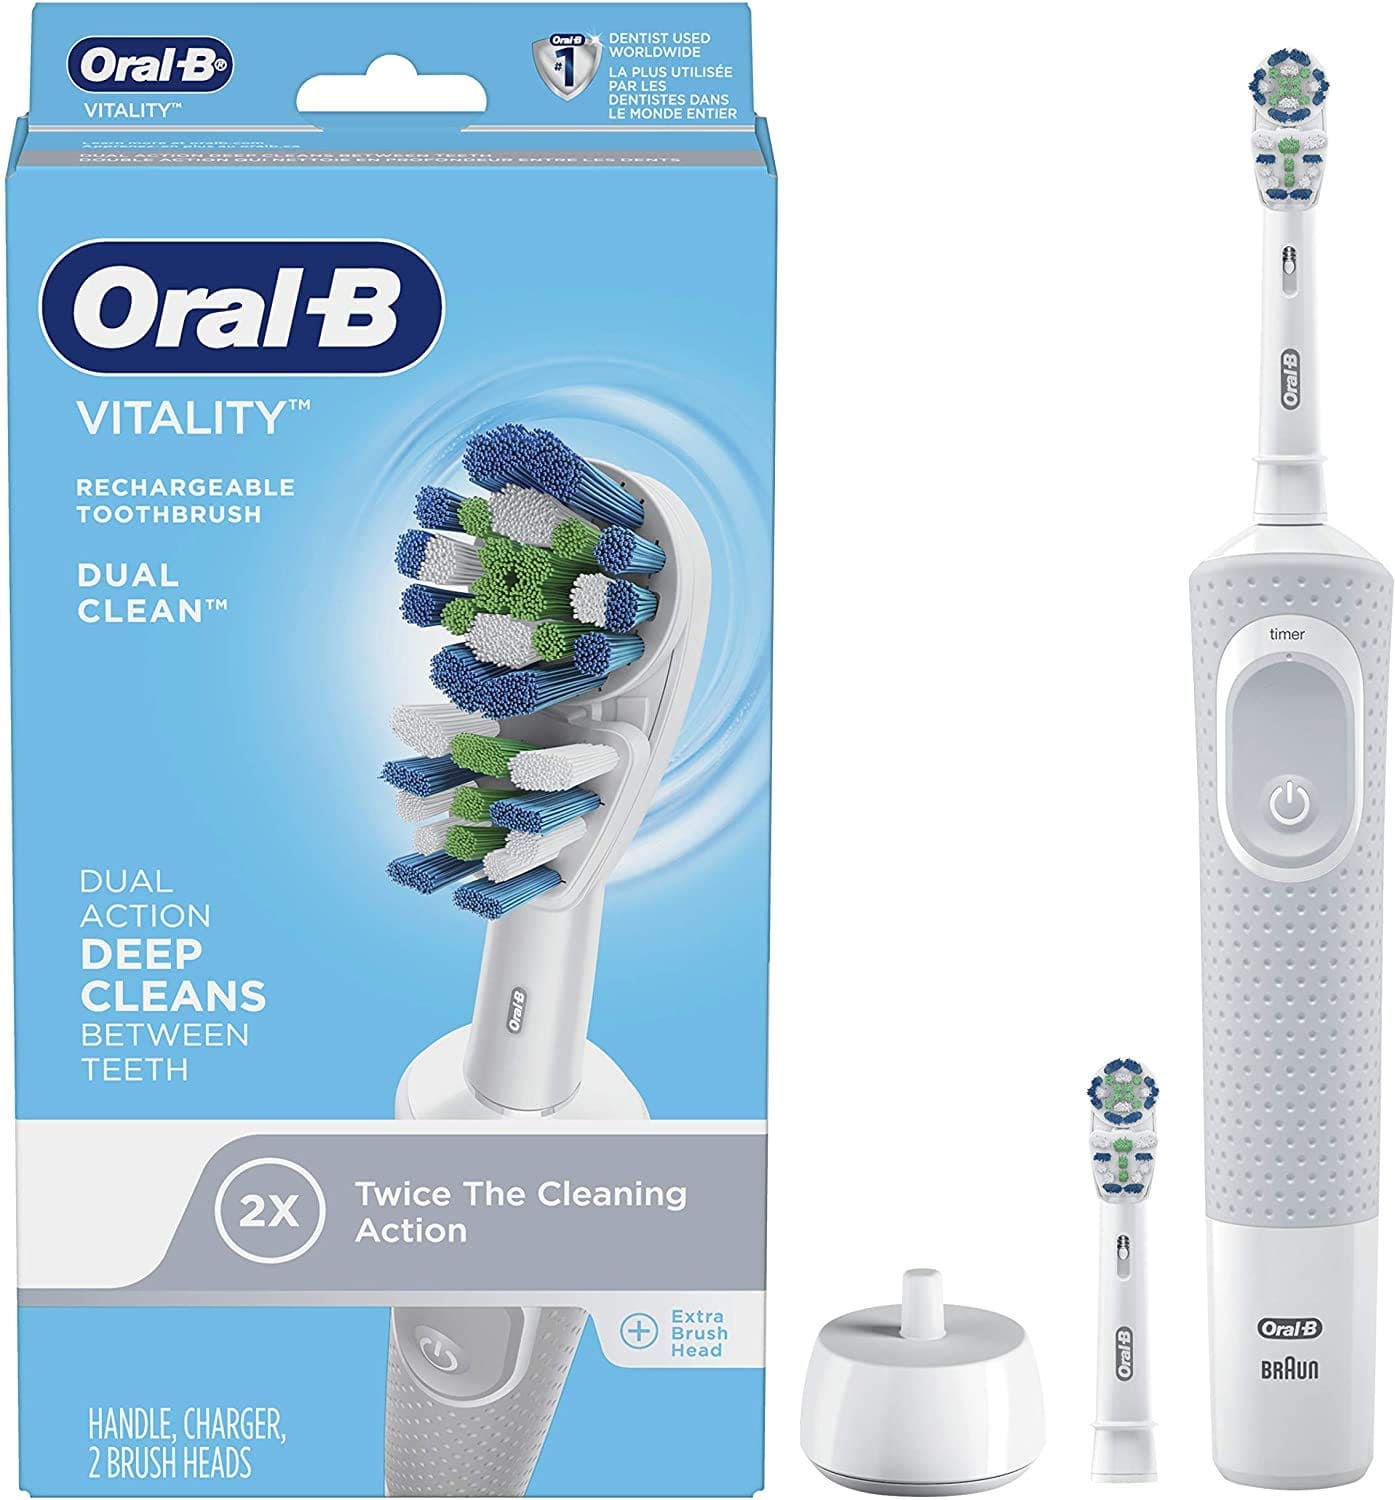 Oral-B Vitality Dual Clean Electric Toothbrush